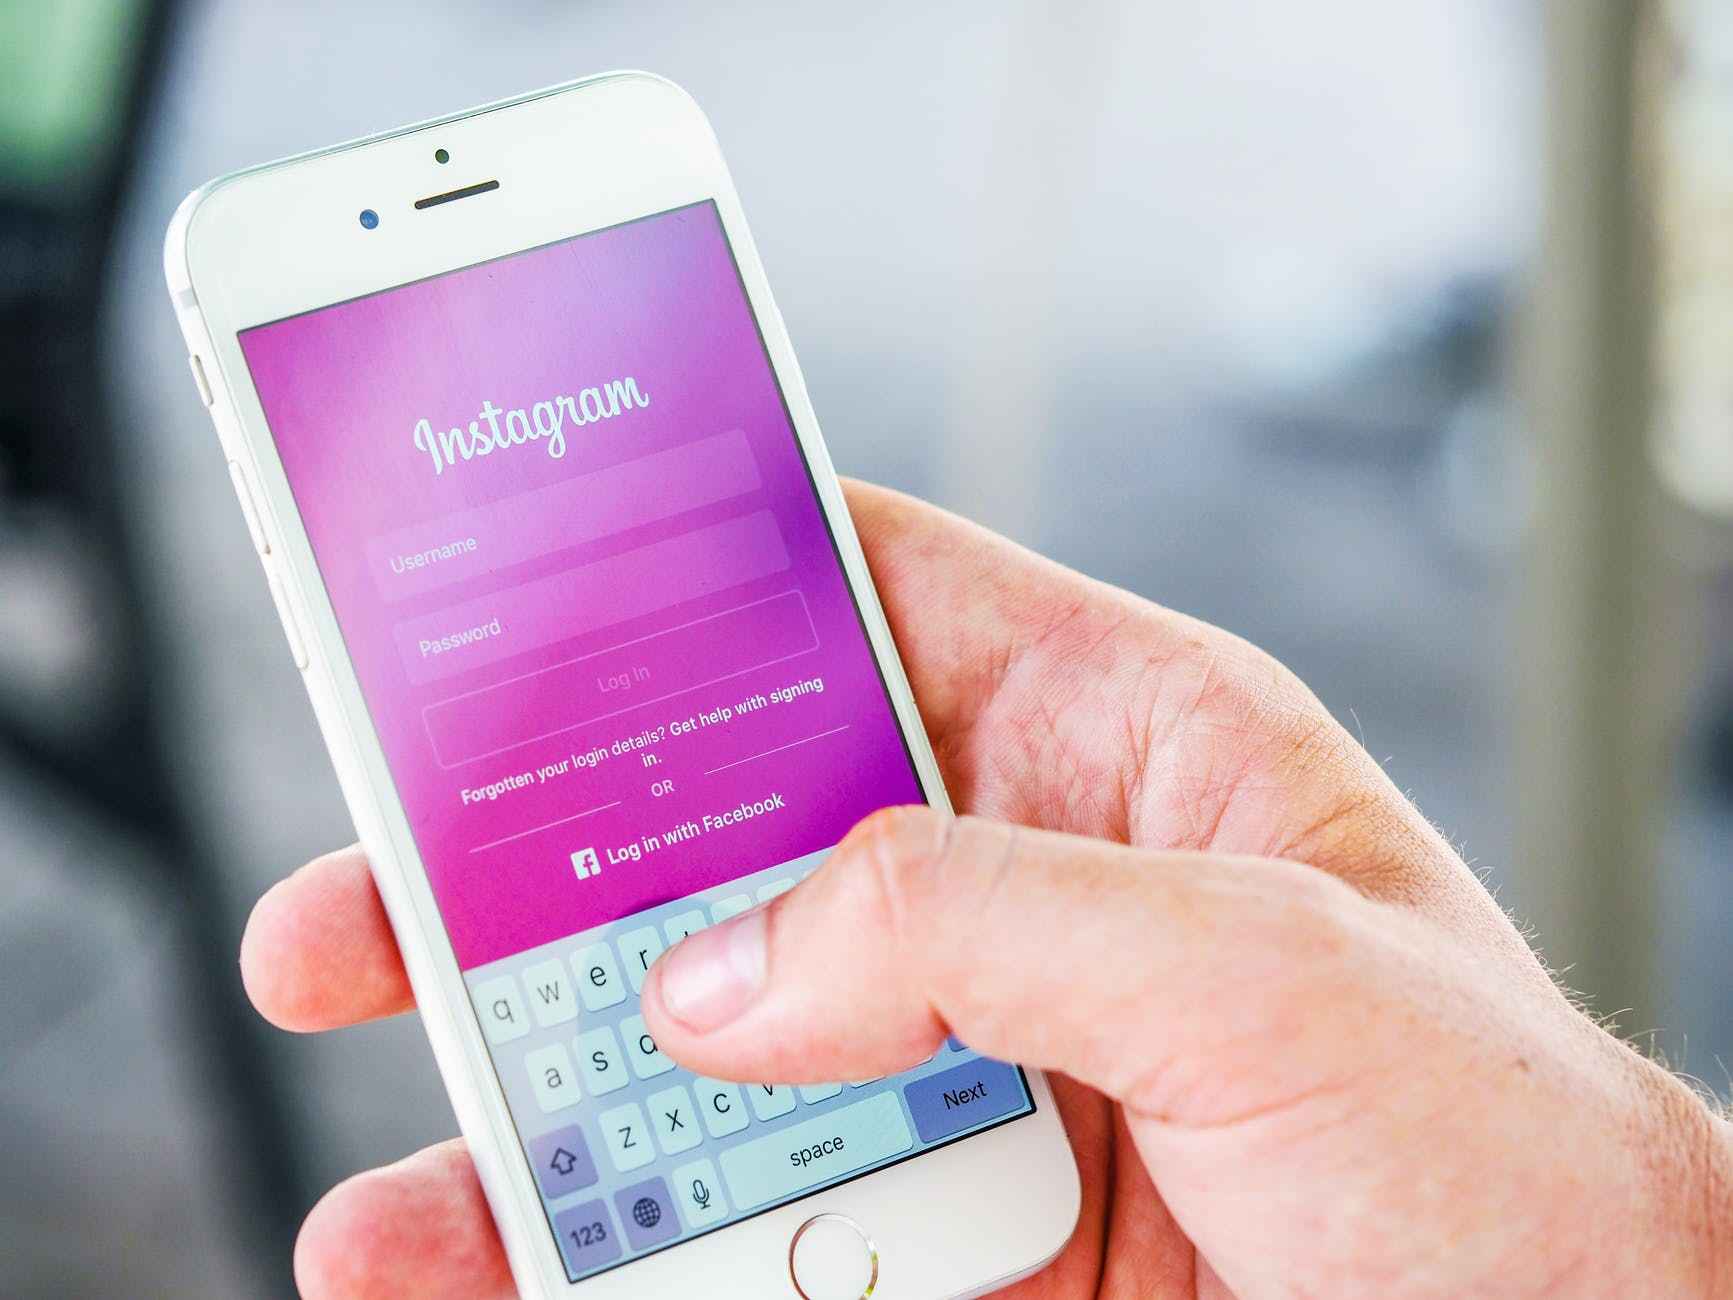 How to Buy Instagram Followers Instantly?